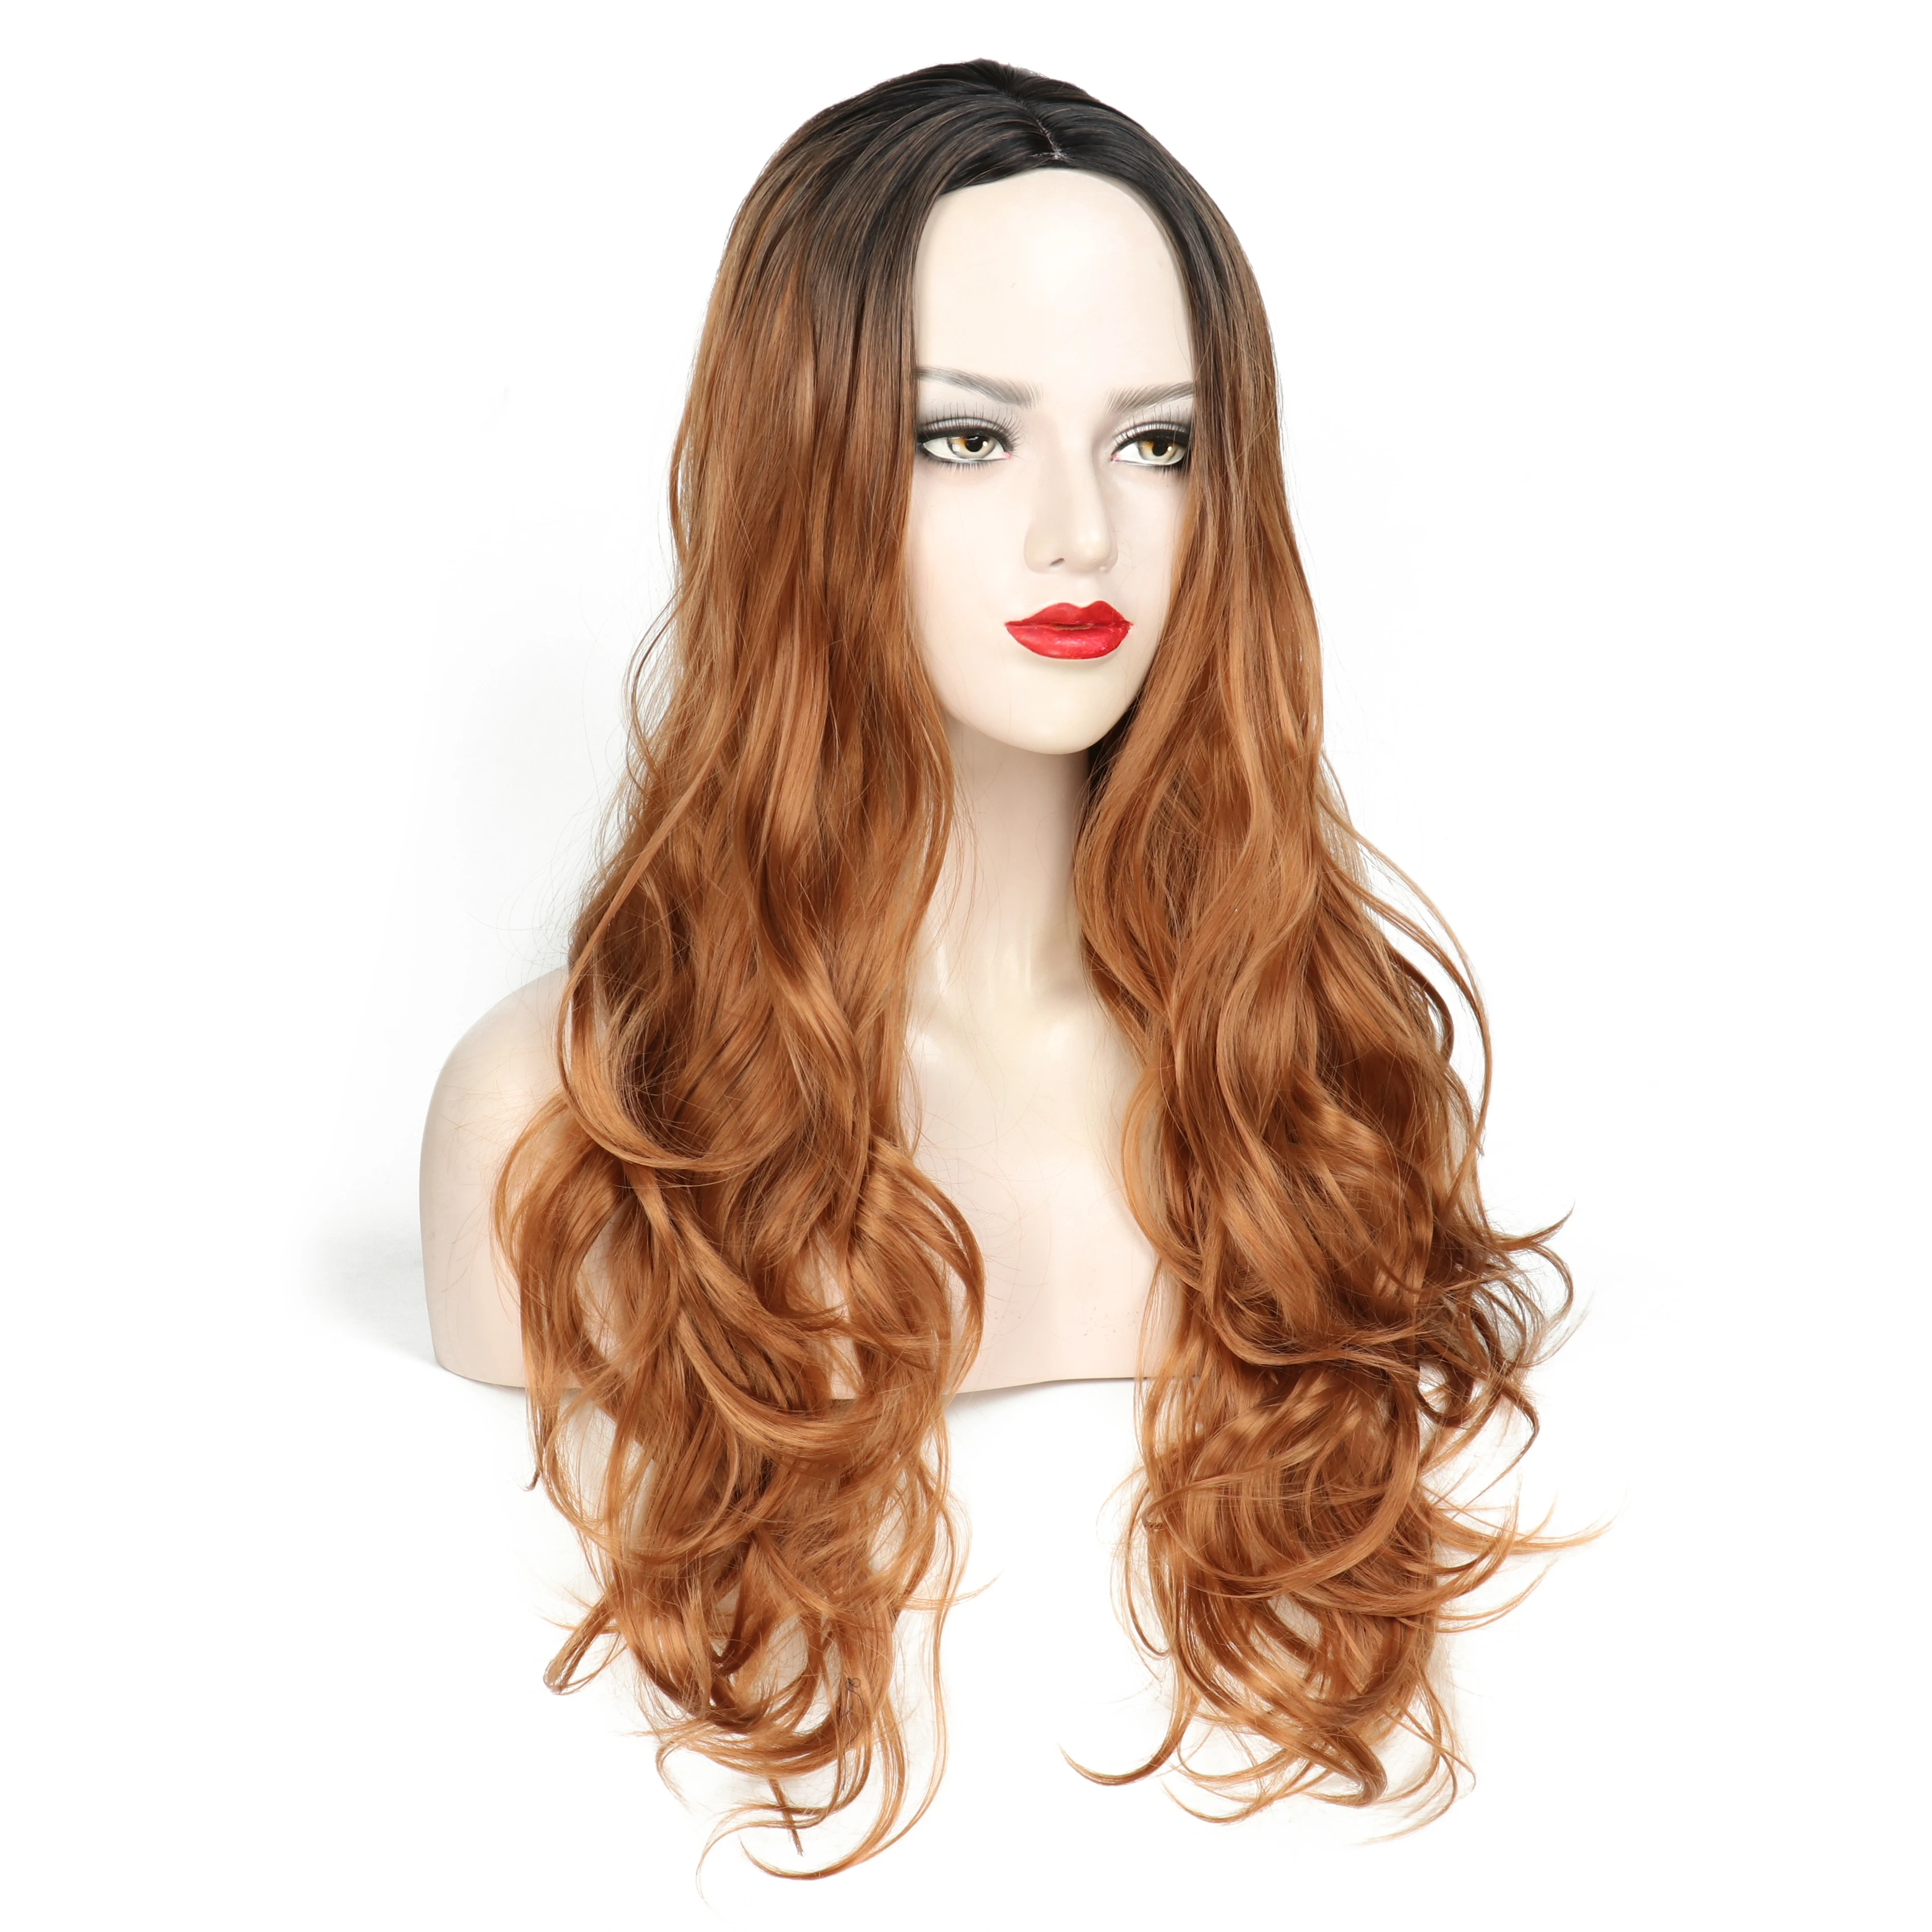 

SHUOHAN 70cm Synthetic Wavy Ombre Brown Wig for Black Women High Temperature Fiber Heat Resistant Cosplay Long